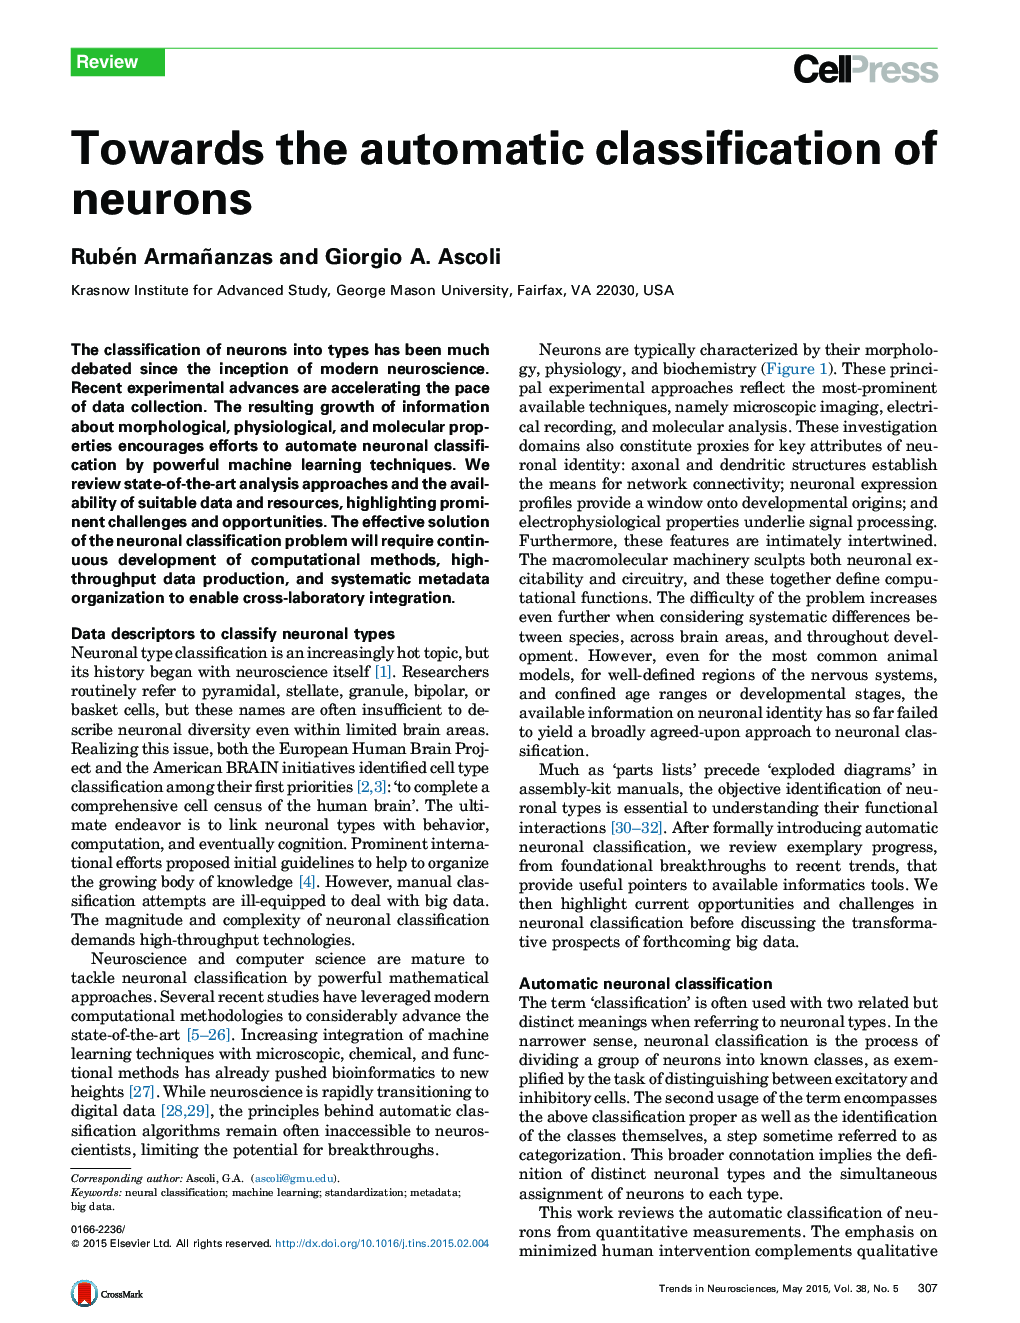 Towards the automatic classification of neurons